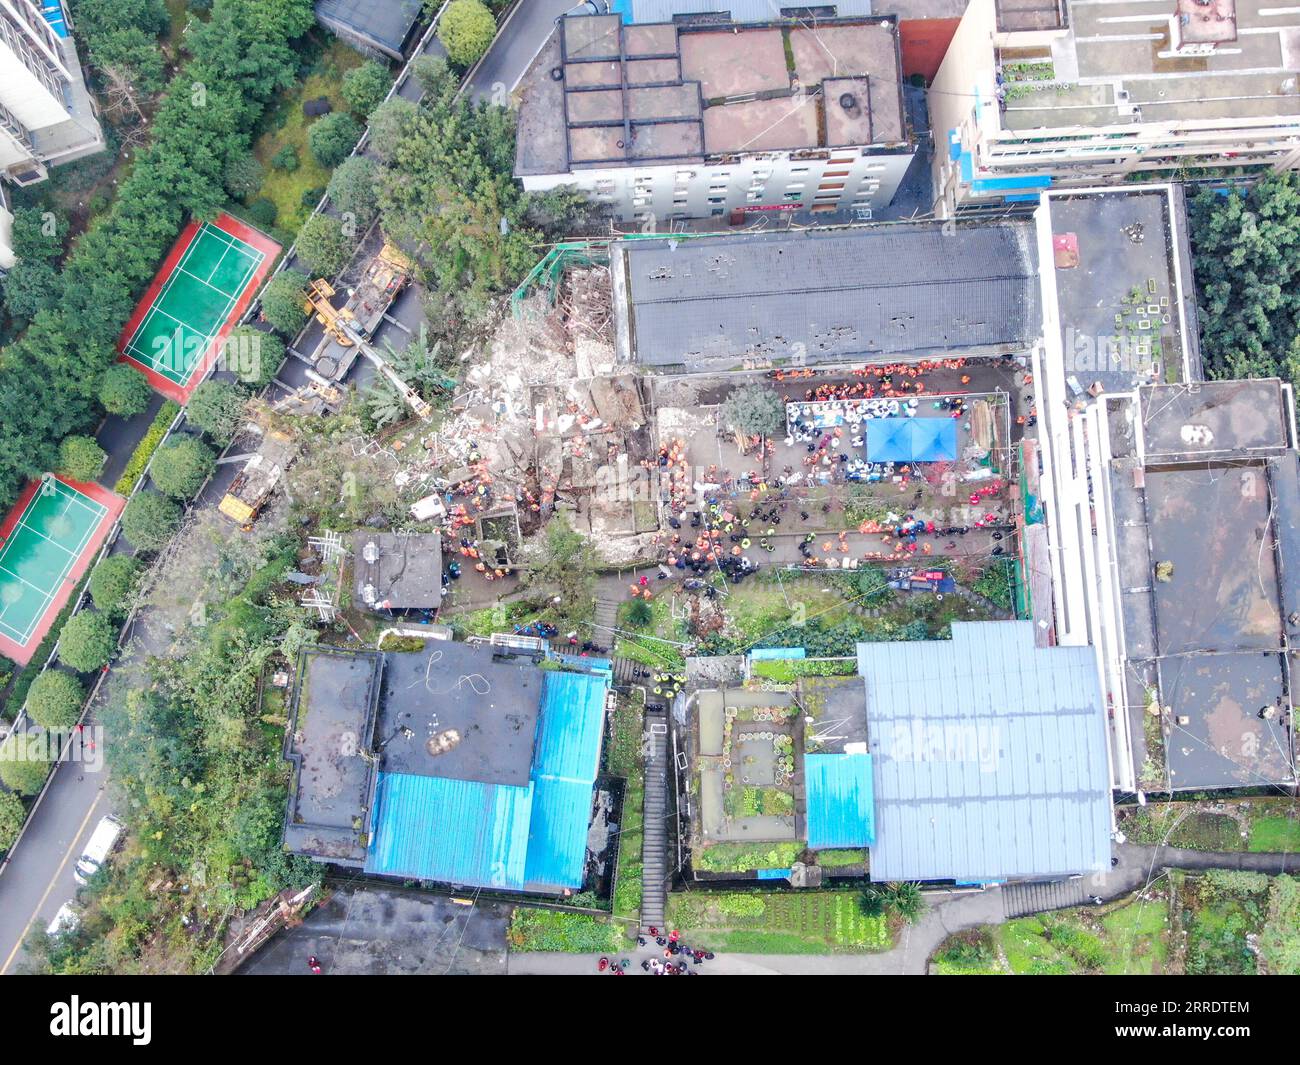 220107 -- CHONGQING, Jan. 7, 2022 -- Aerial photo taken on Jan. 7, 2022 shows the site of a blast in Wulong District, southwest China s Chongqing. More than 20 people were believed to have been trapped after a blast rocked a canteen of a subdistrict office in Wulong District, southwest China s Chongqing Municipality, on Friday noon. The accident took place at 12:10 p.m. due to suspected gas leakage which triggered the explosion and caused the collapse, said the municipal publicity department. According to witnesses, people were having lunch in the canteen when the blast took place. A number of Stock Photo